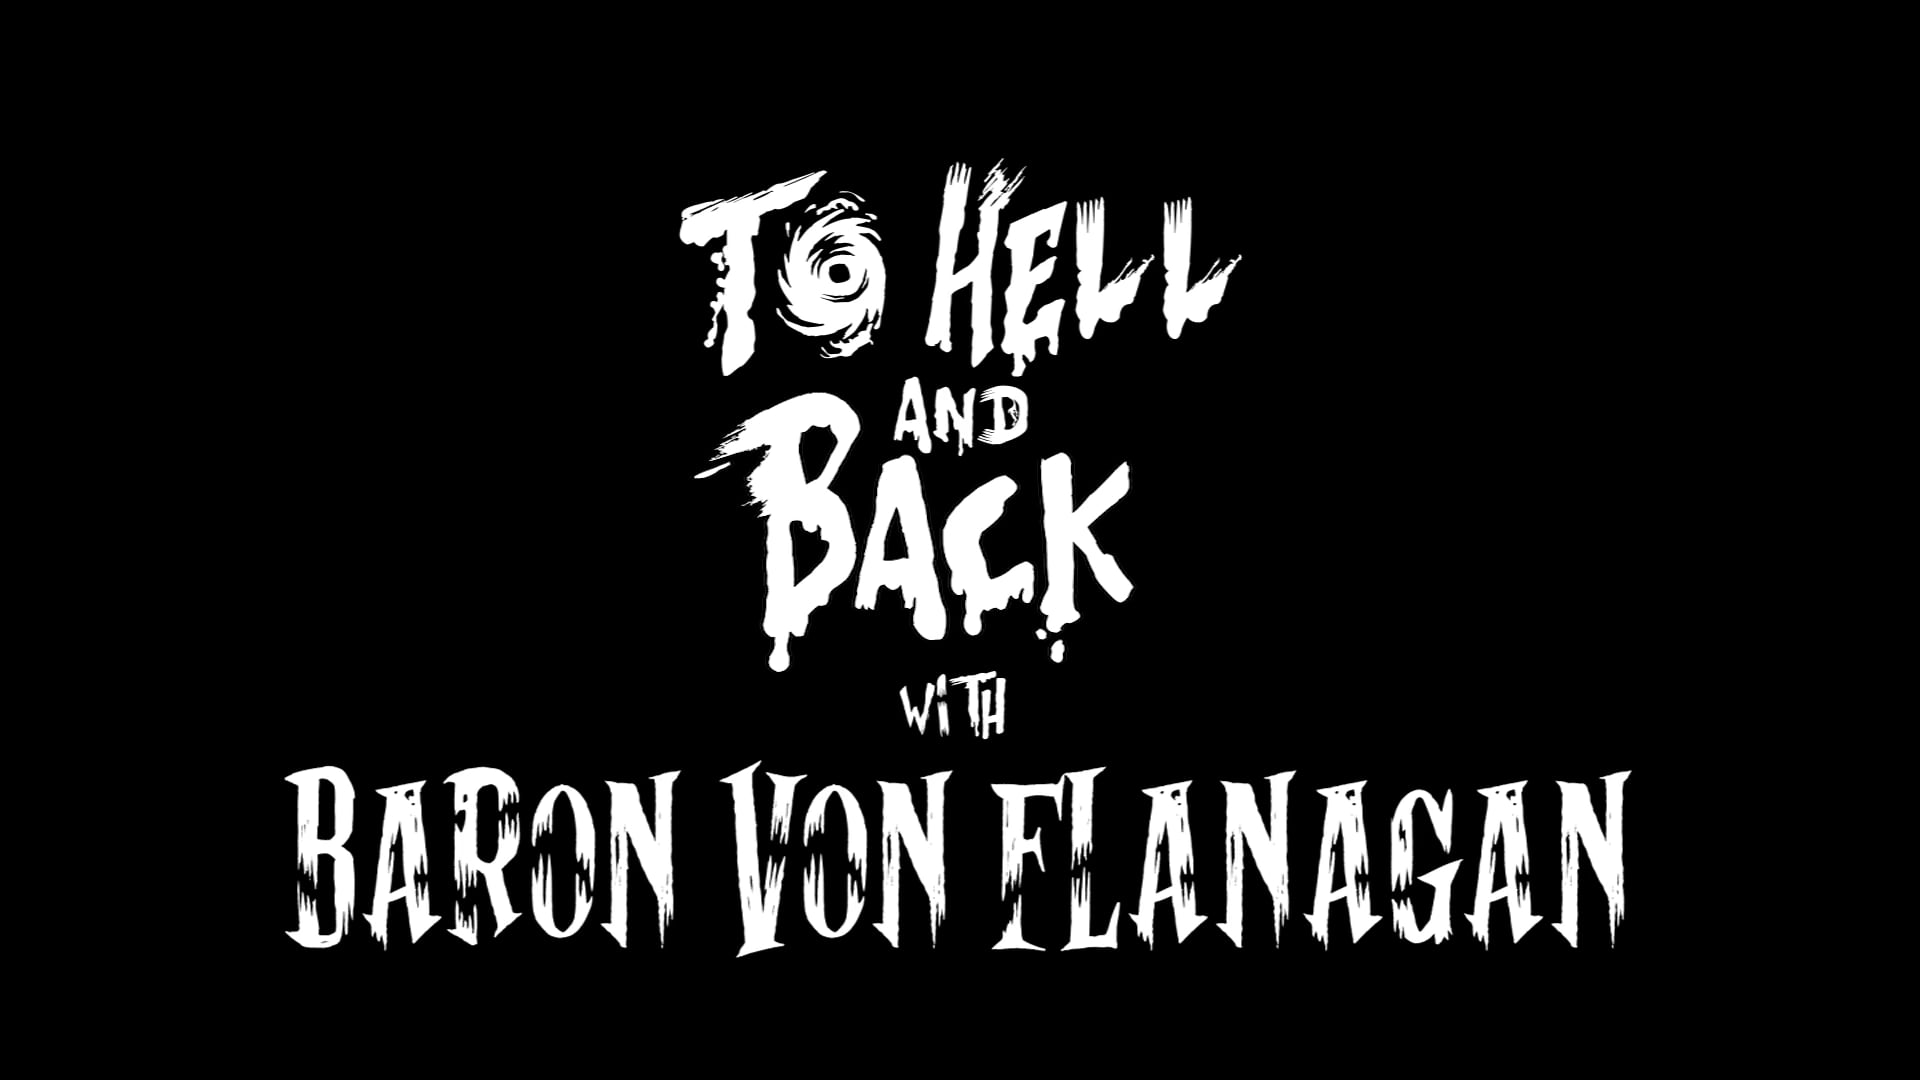 Teaser 1. To Hell and Back w/ Baron Von Flanagan